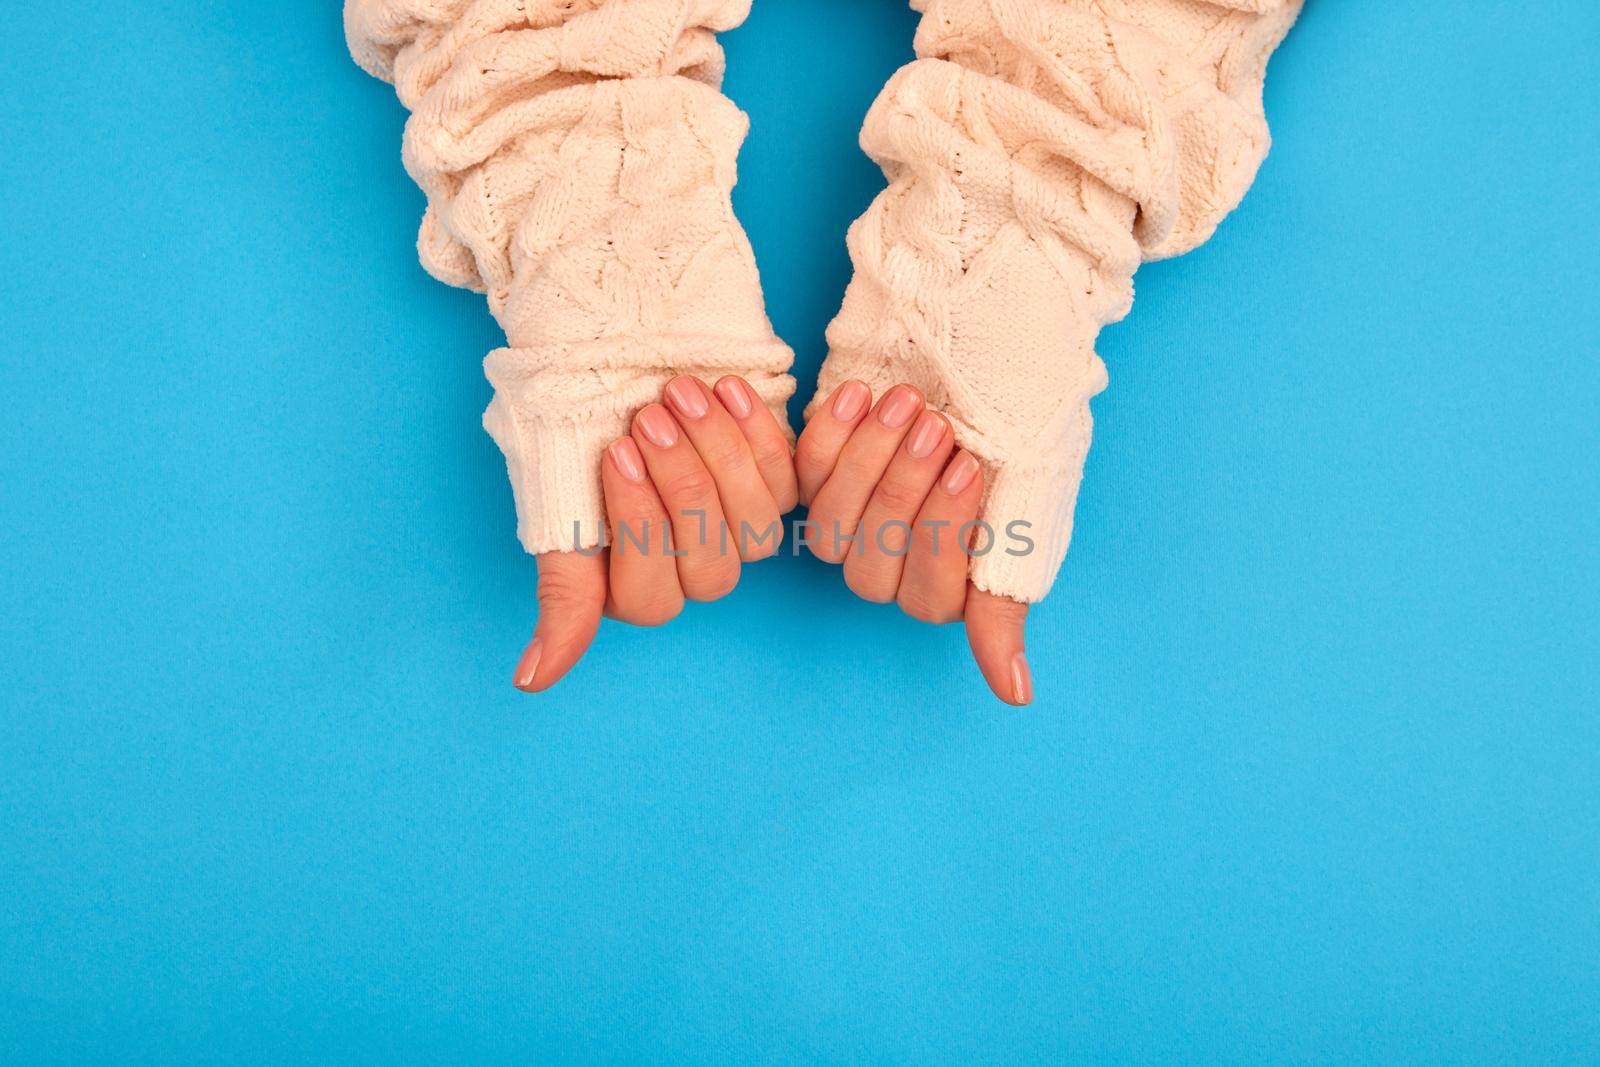 Neat manicure female hands sweater sleeves nude naturel on a blue background